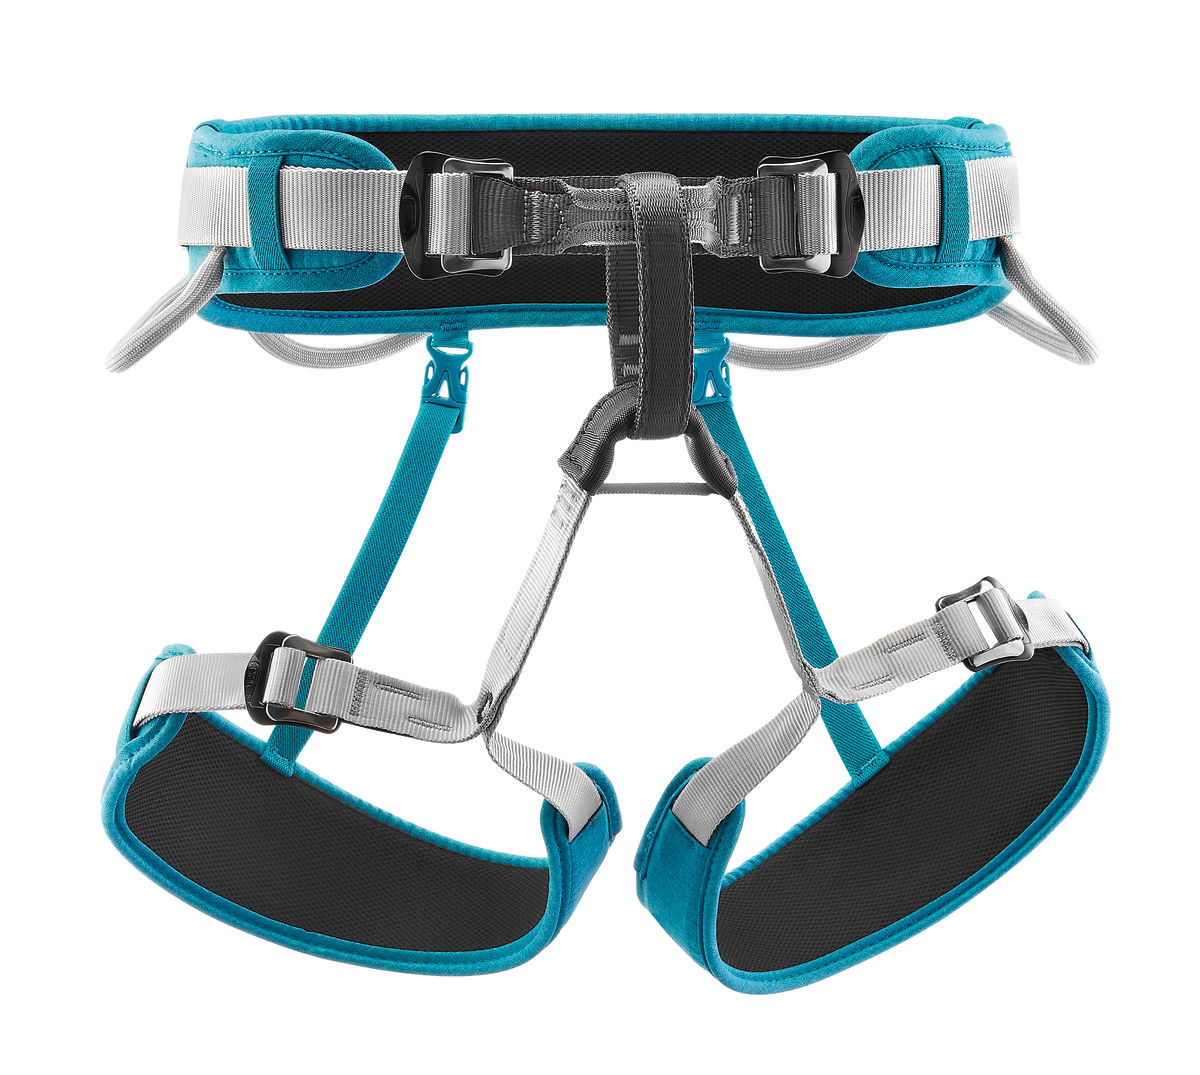 Corax Harness - Turquoise - Pathfinder of WV